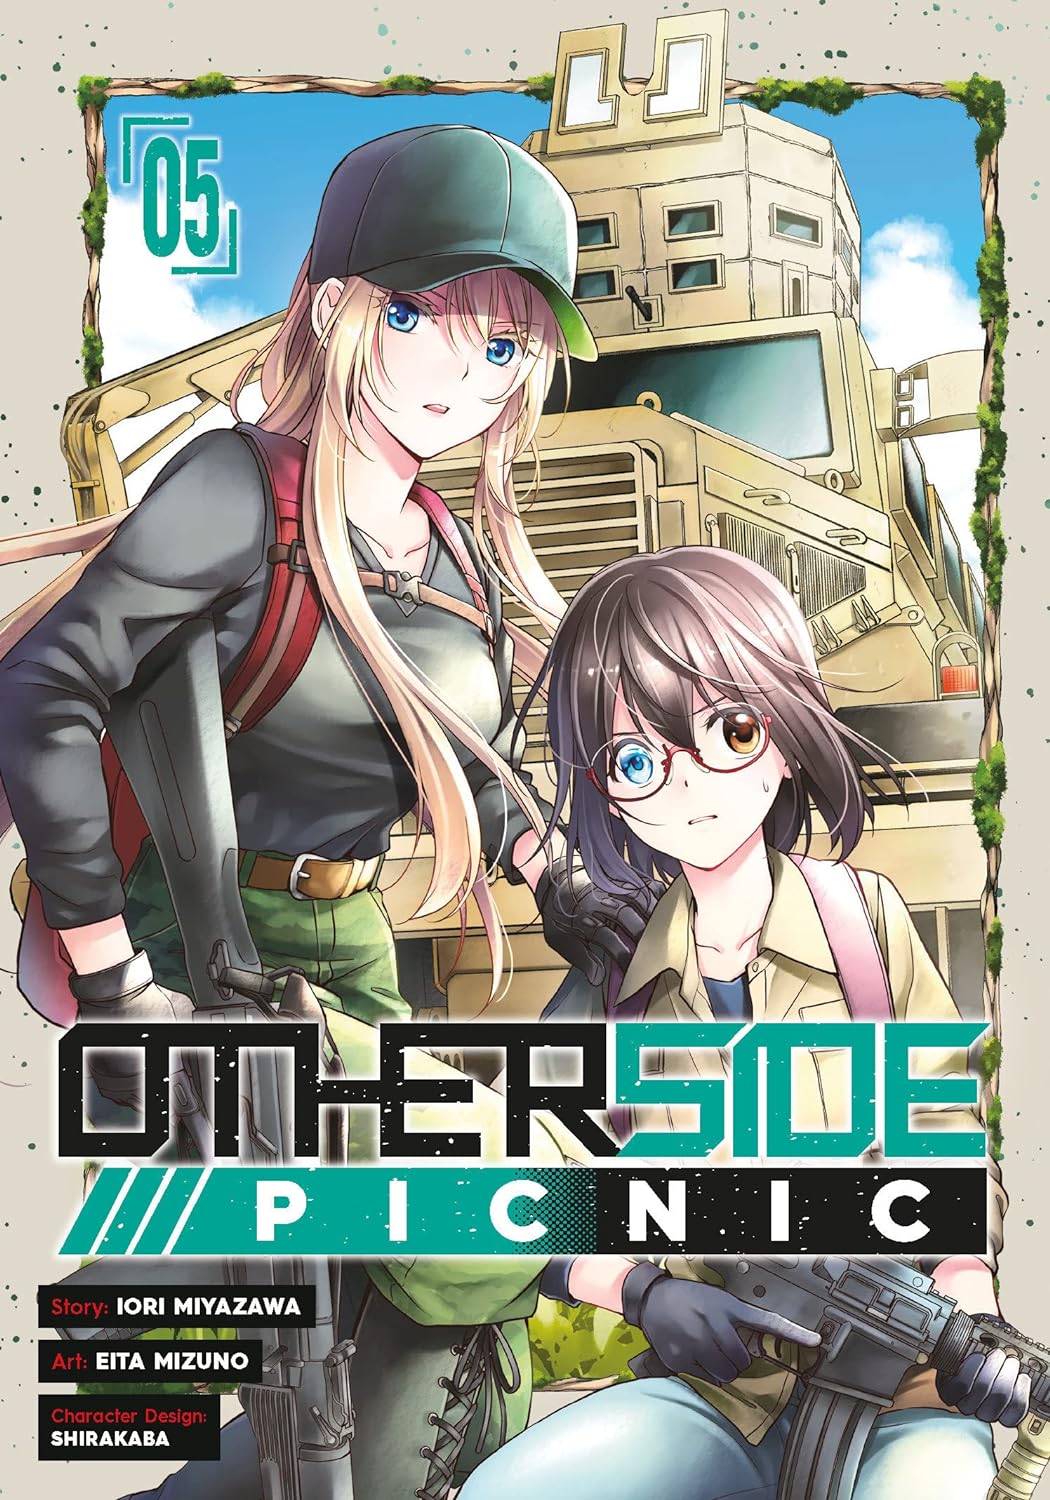 Otherside Picnic is a Passable Anime Based on a Great Horror Novel